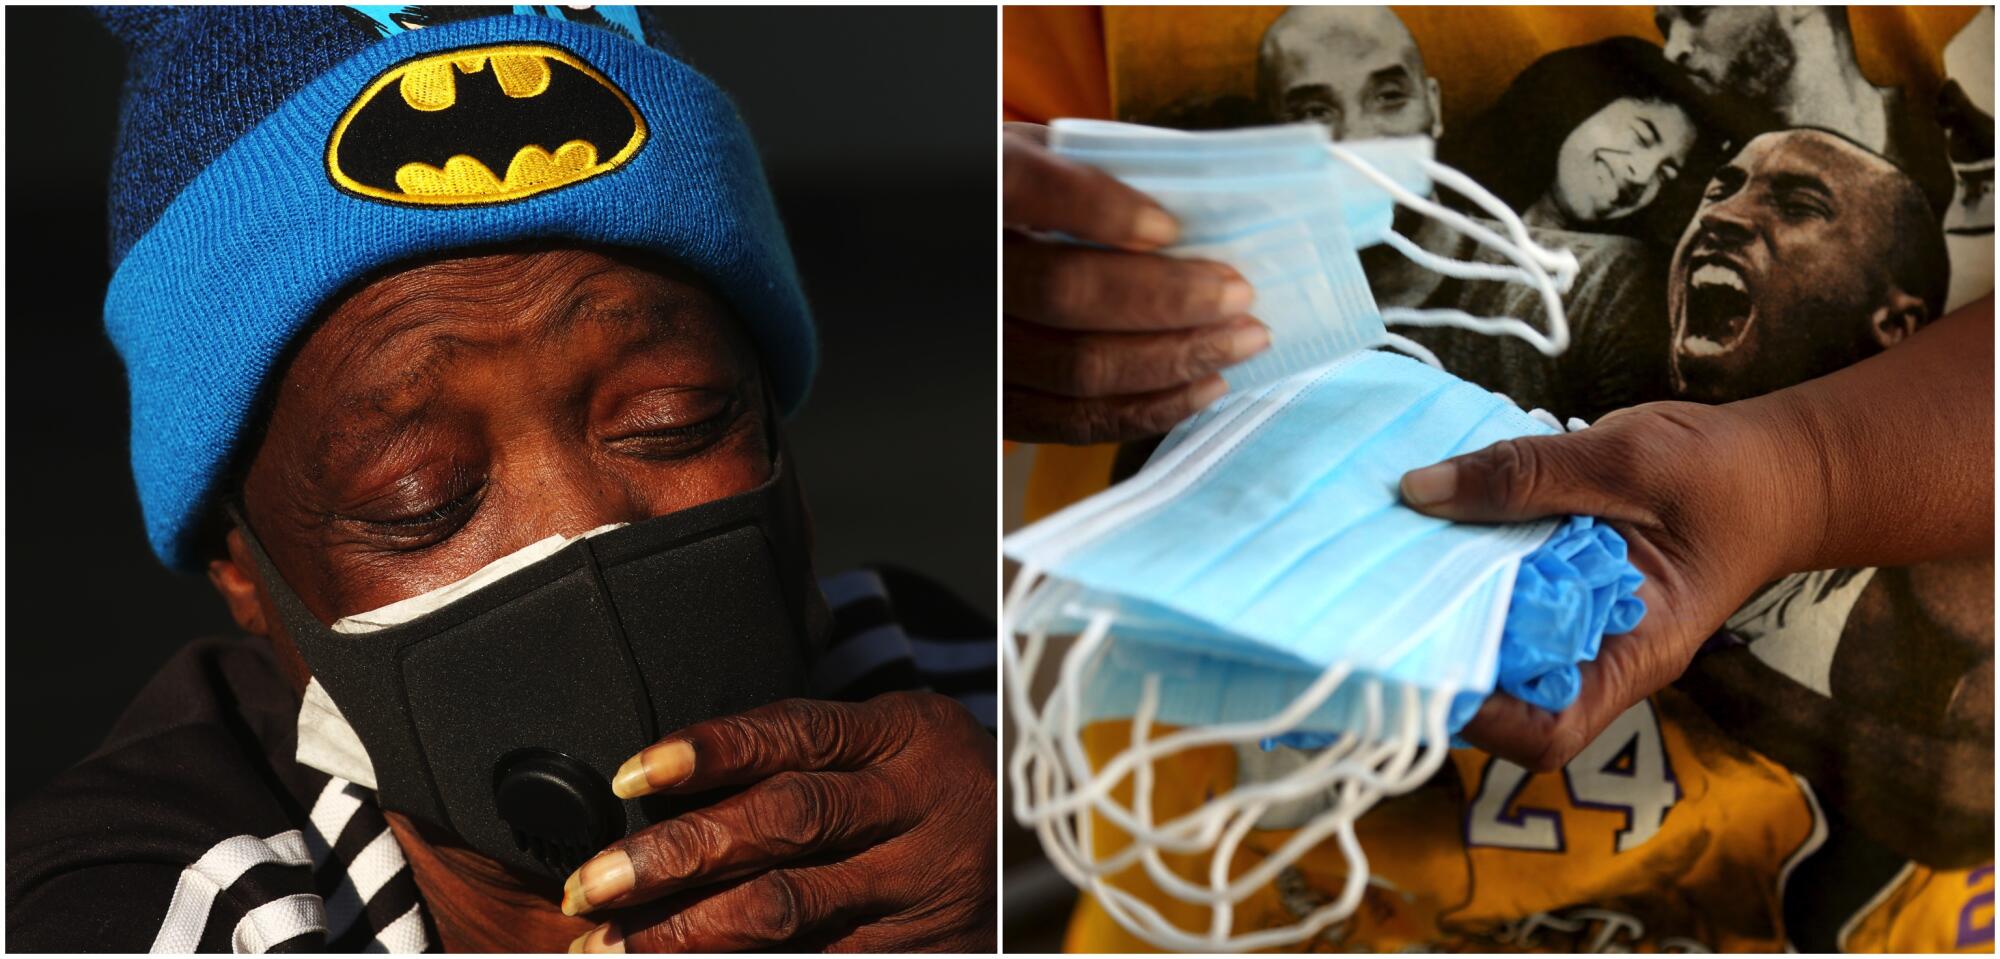 Neise Kennedy waits to pick up food in South L.A.; a worker puts masks into food bags.